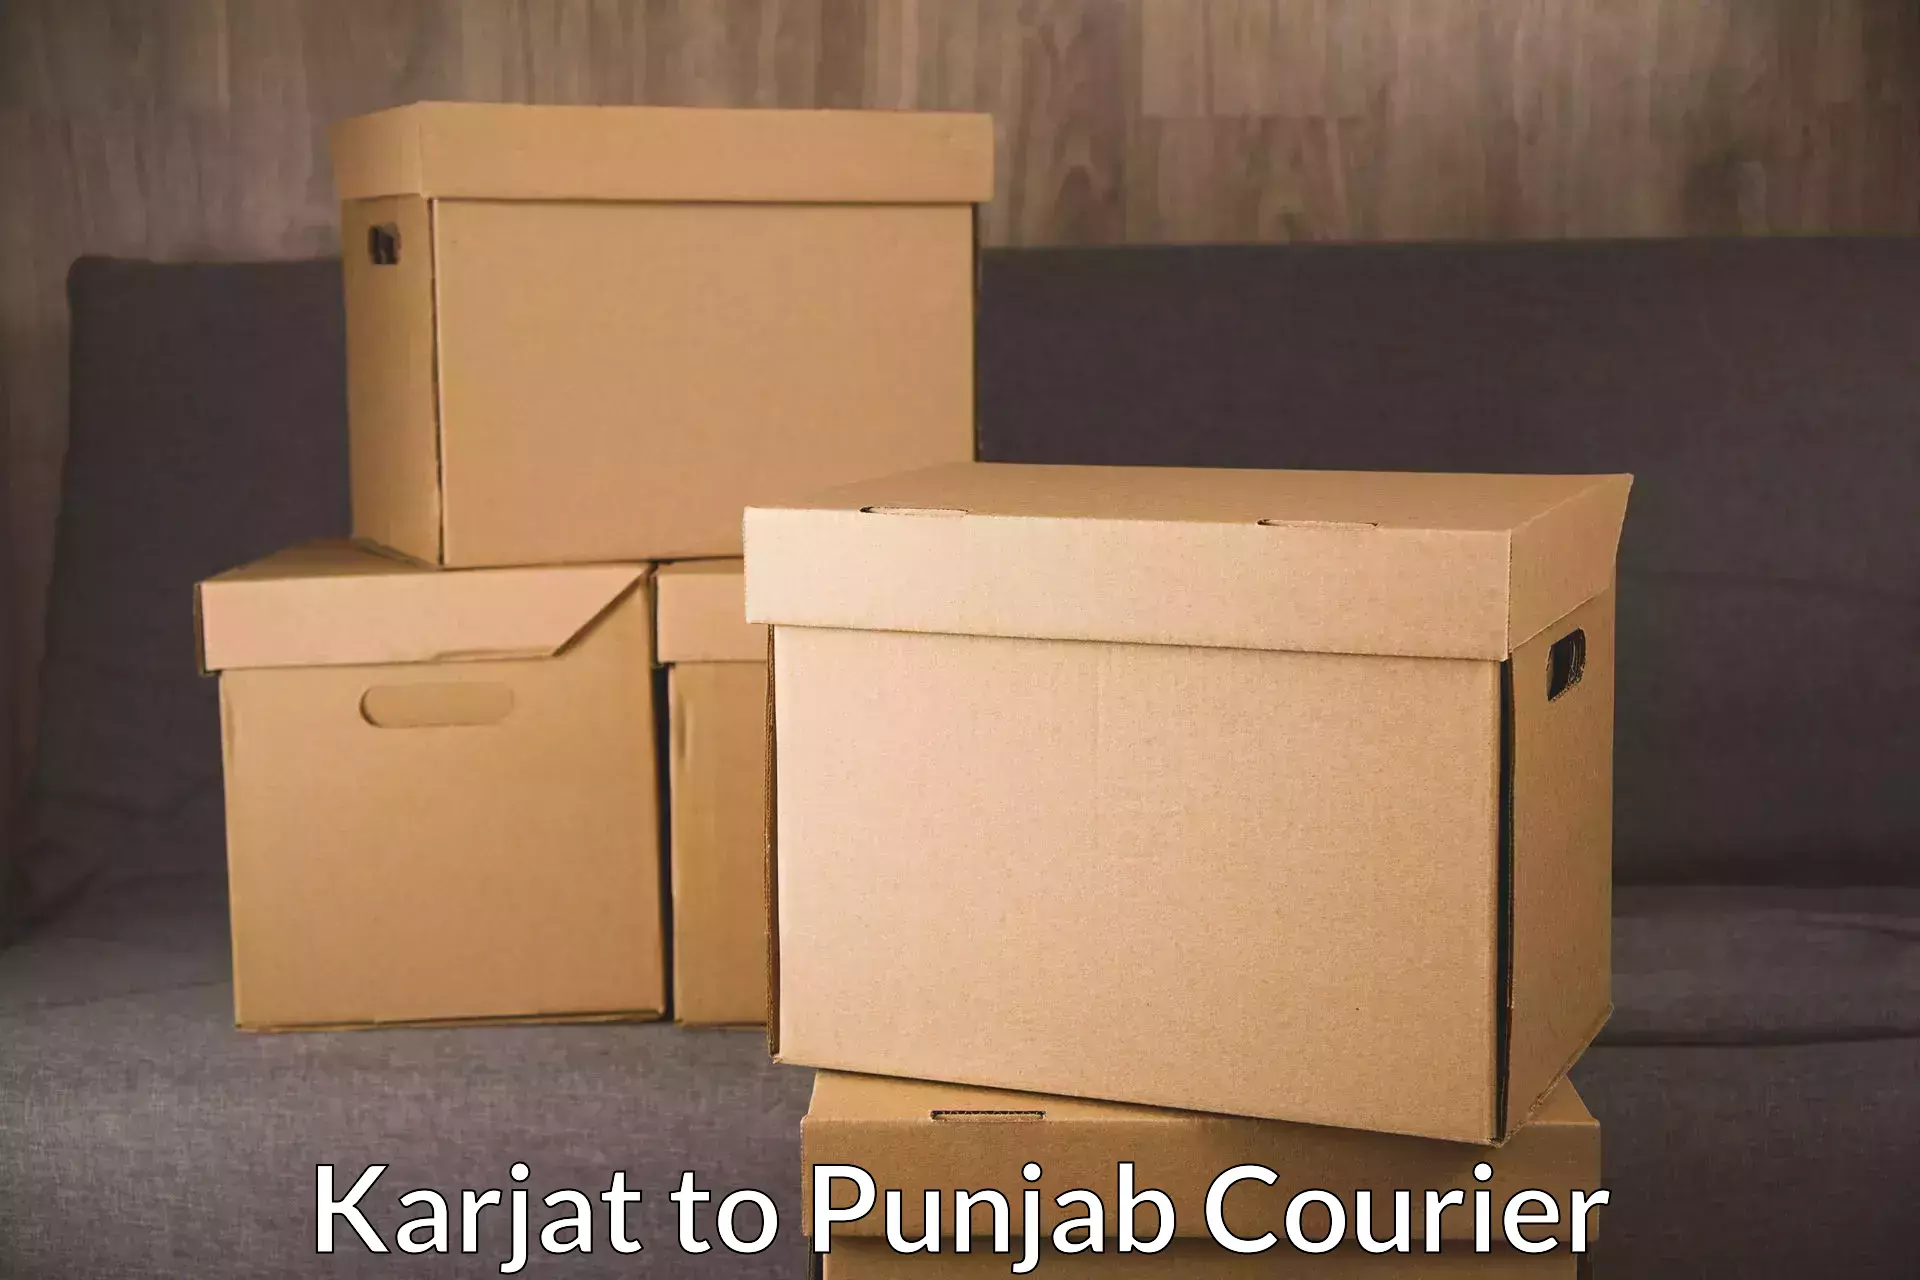 Seamless shipping experience Karjat to IIT Ropar